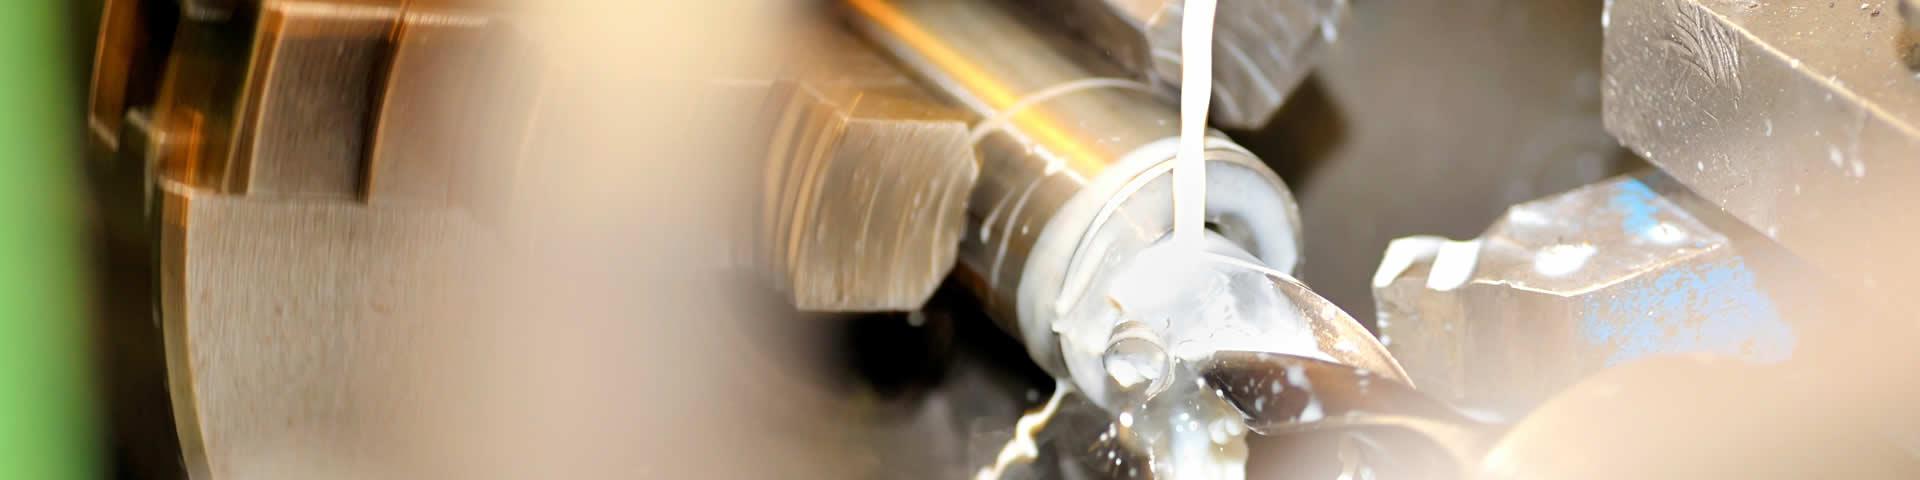 Technical Services - a machine tool drilling a metallic part.